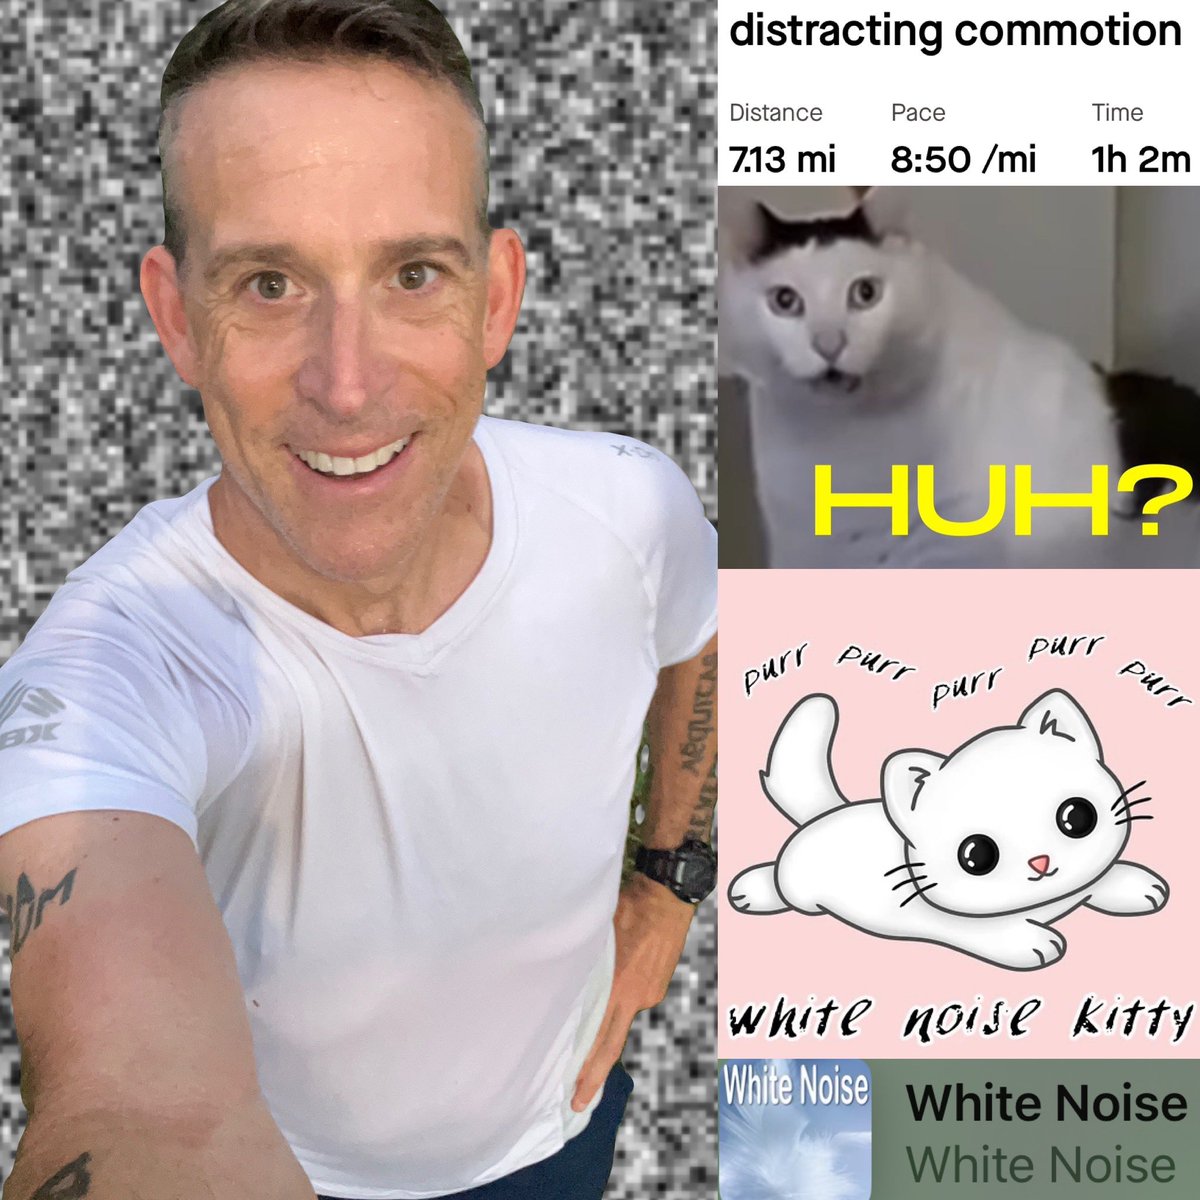 White noise and running hold me together. I give tinnitus 1 out of 5 stars. #runningformentalhealth #mentalhealthrun #tinnitus